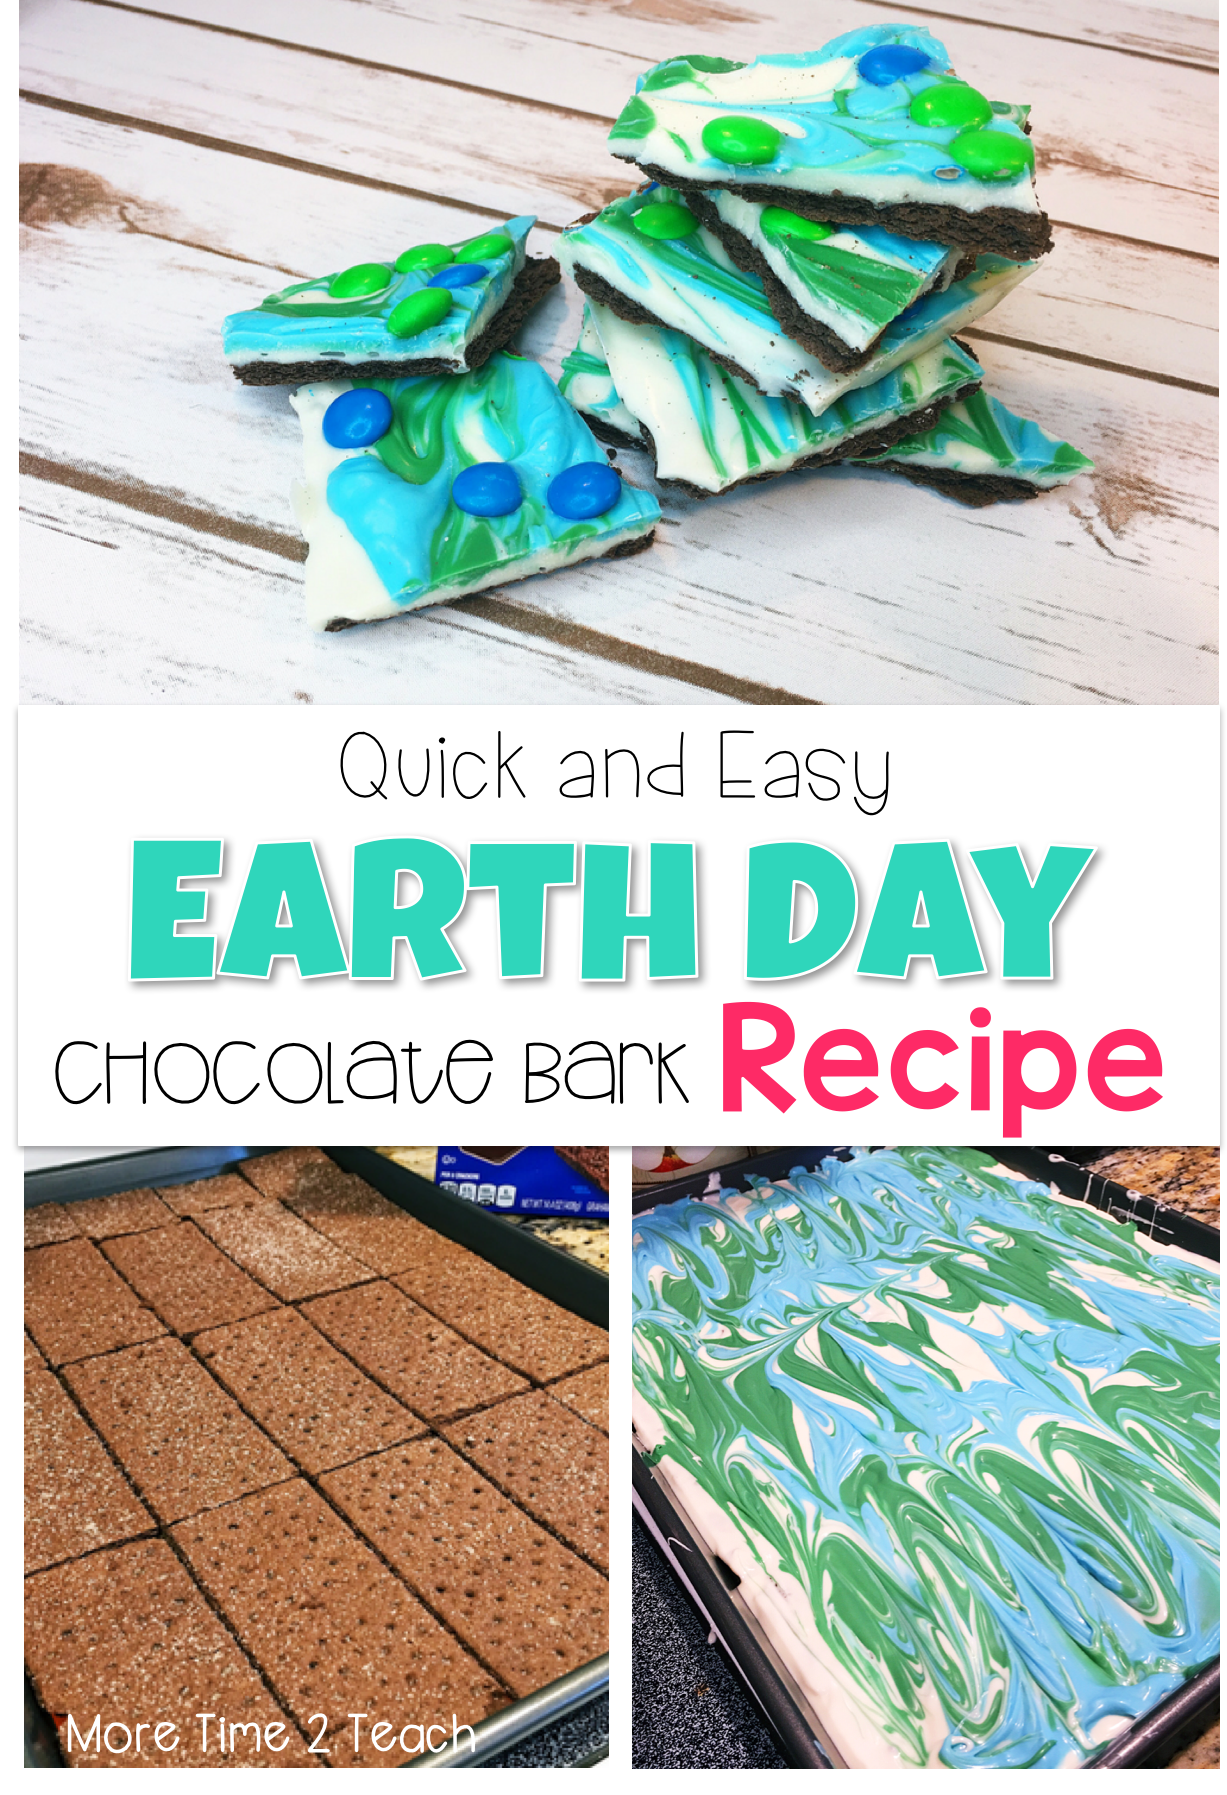 This quick and easy to make Chocolate Bark recipe is a great way to celebrate Earth Day. It's sure to be a hit with the kids and is so simple that anyone can make it! Beware, once you try it you won't be able to put it down!